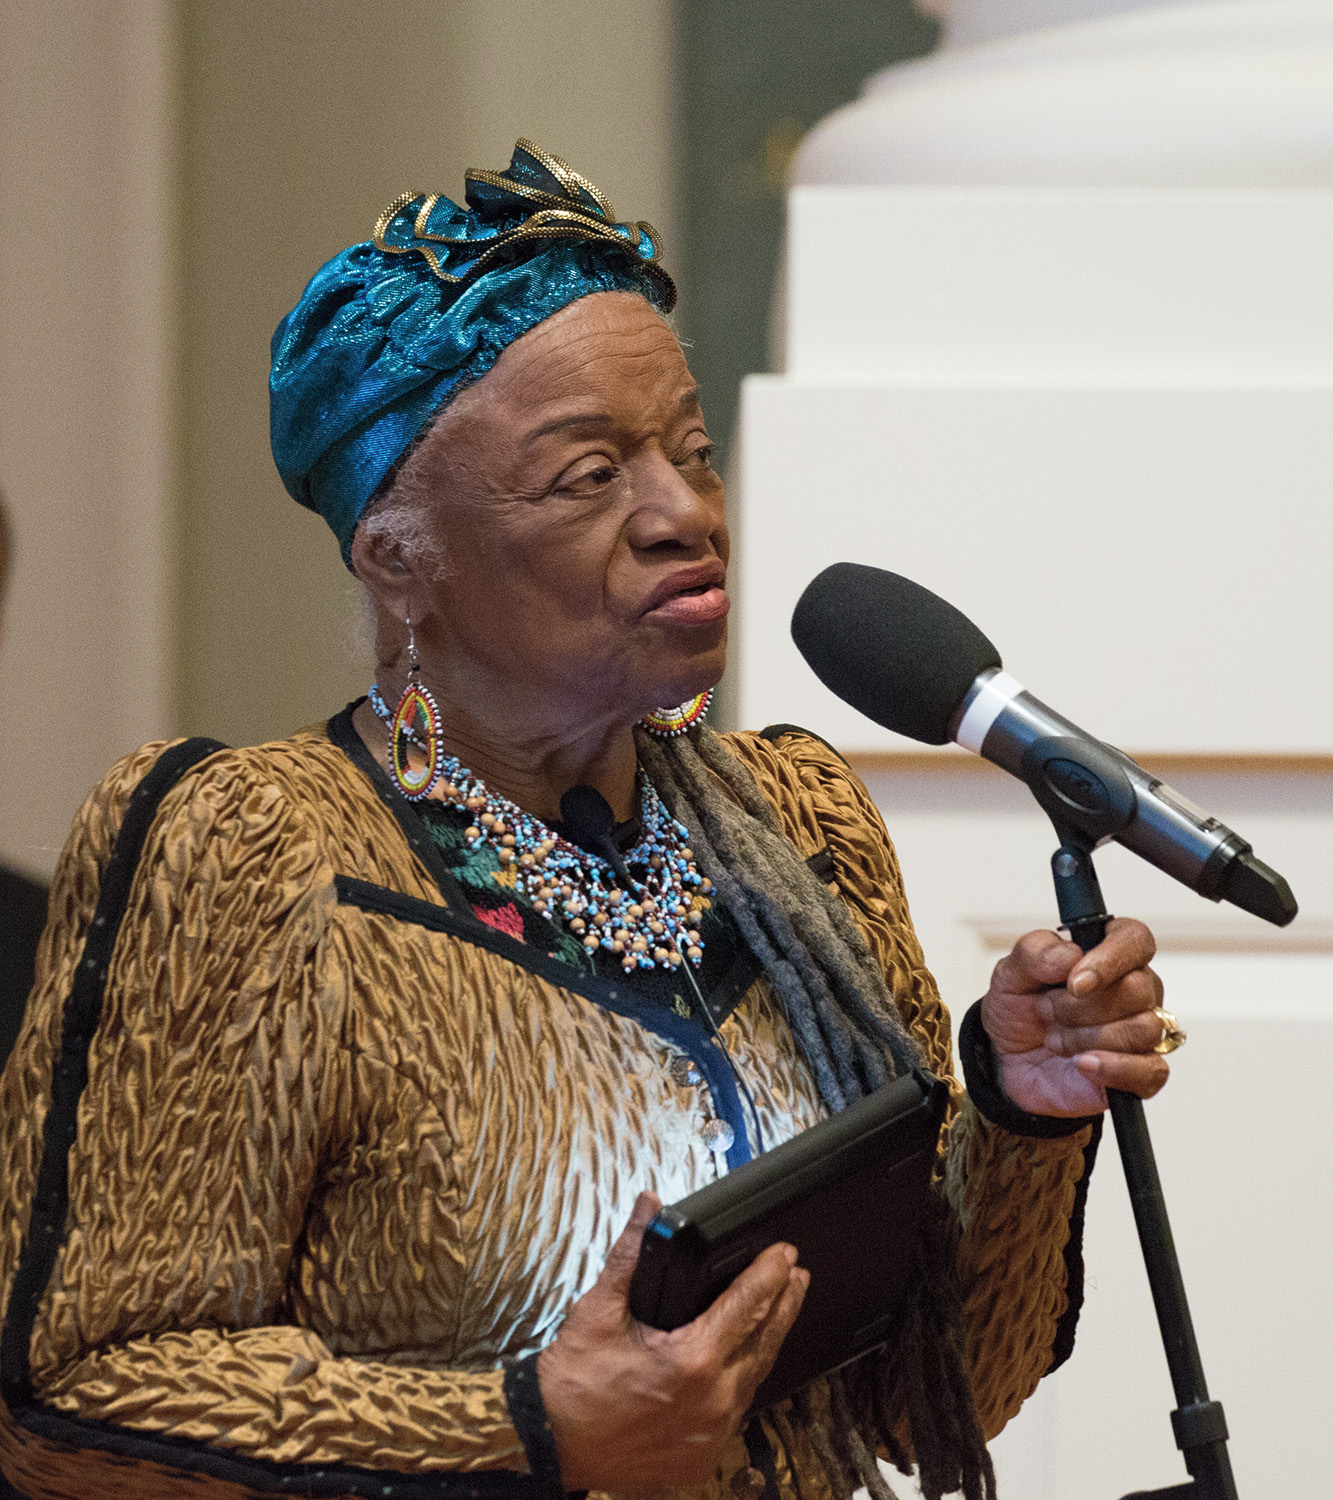 A photograph of Faith Ringgold, a dark-skinned elderly person wearing a blue head wrap, layered necklaces in blue and beige, and a beige festive blouse. Ringgold is speaking into a microphone while holding a computer tablet.